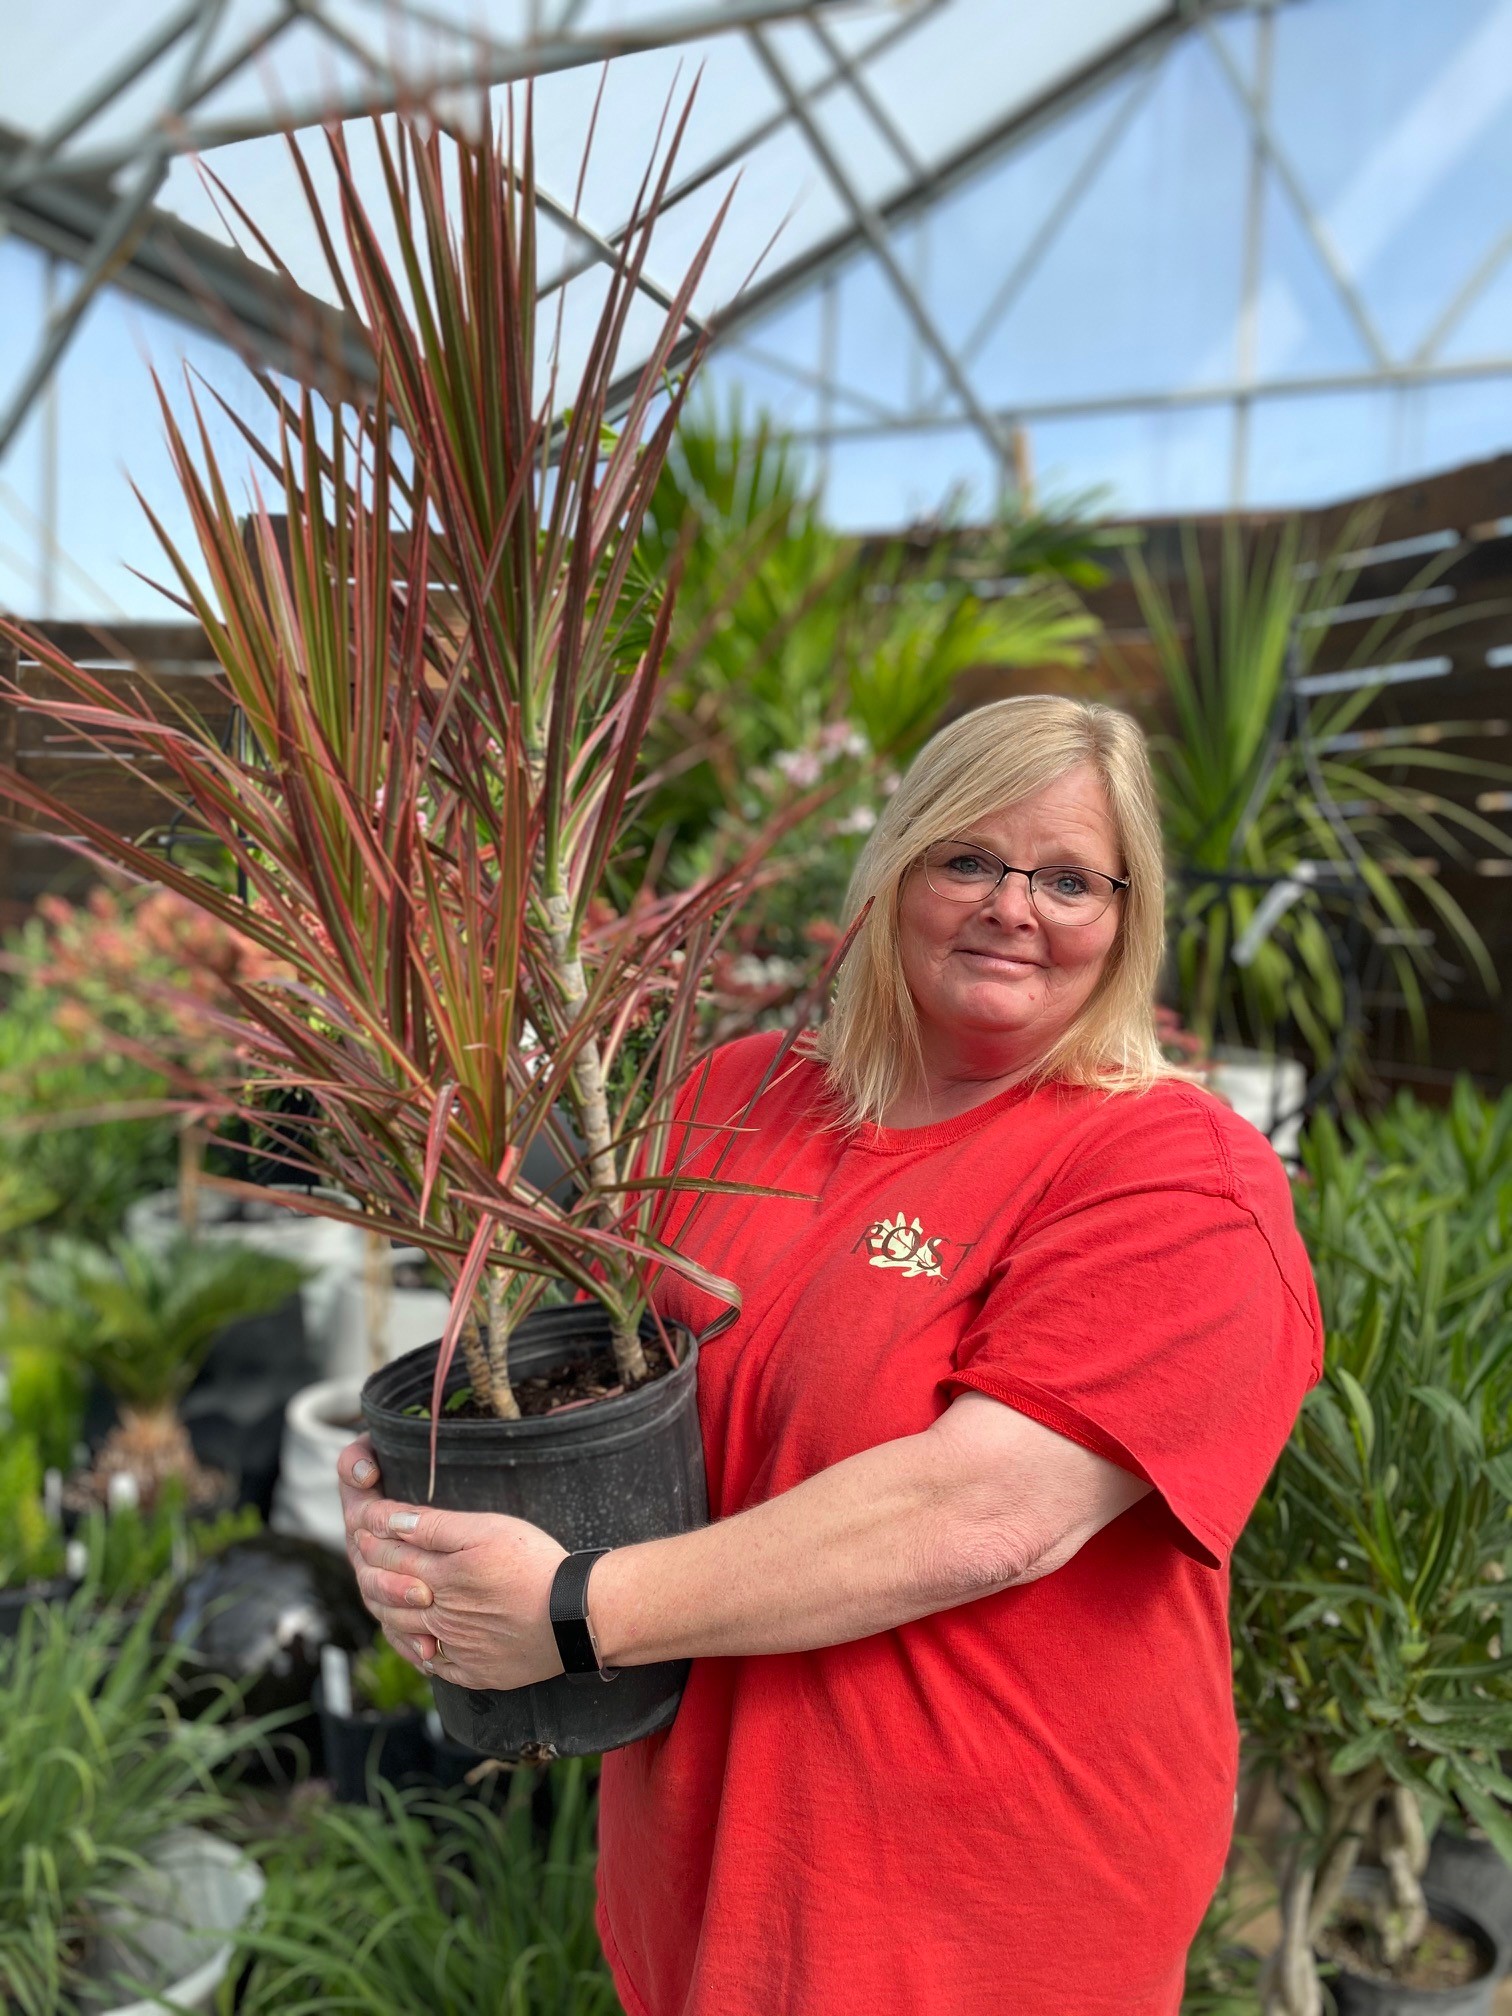 blond woman in rest rost landscaping shirt holing a potted dracena colorama in a greenhouse